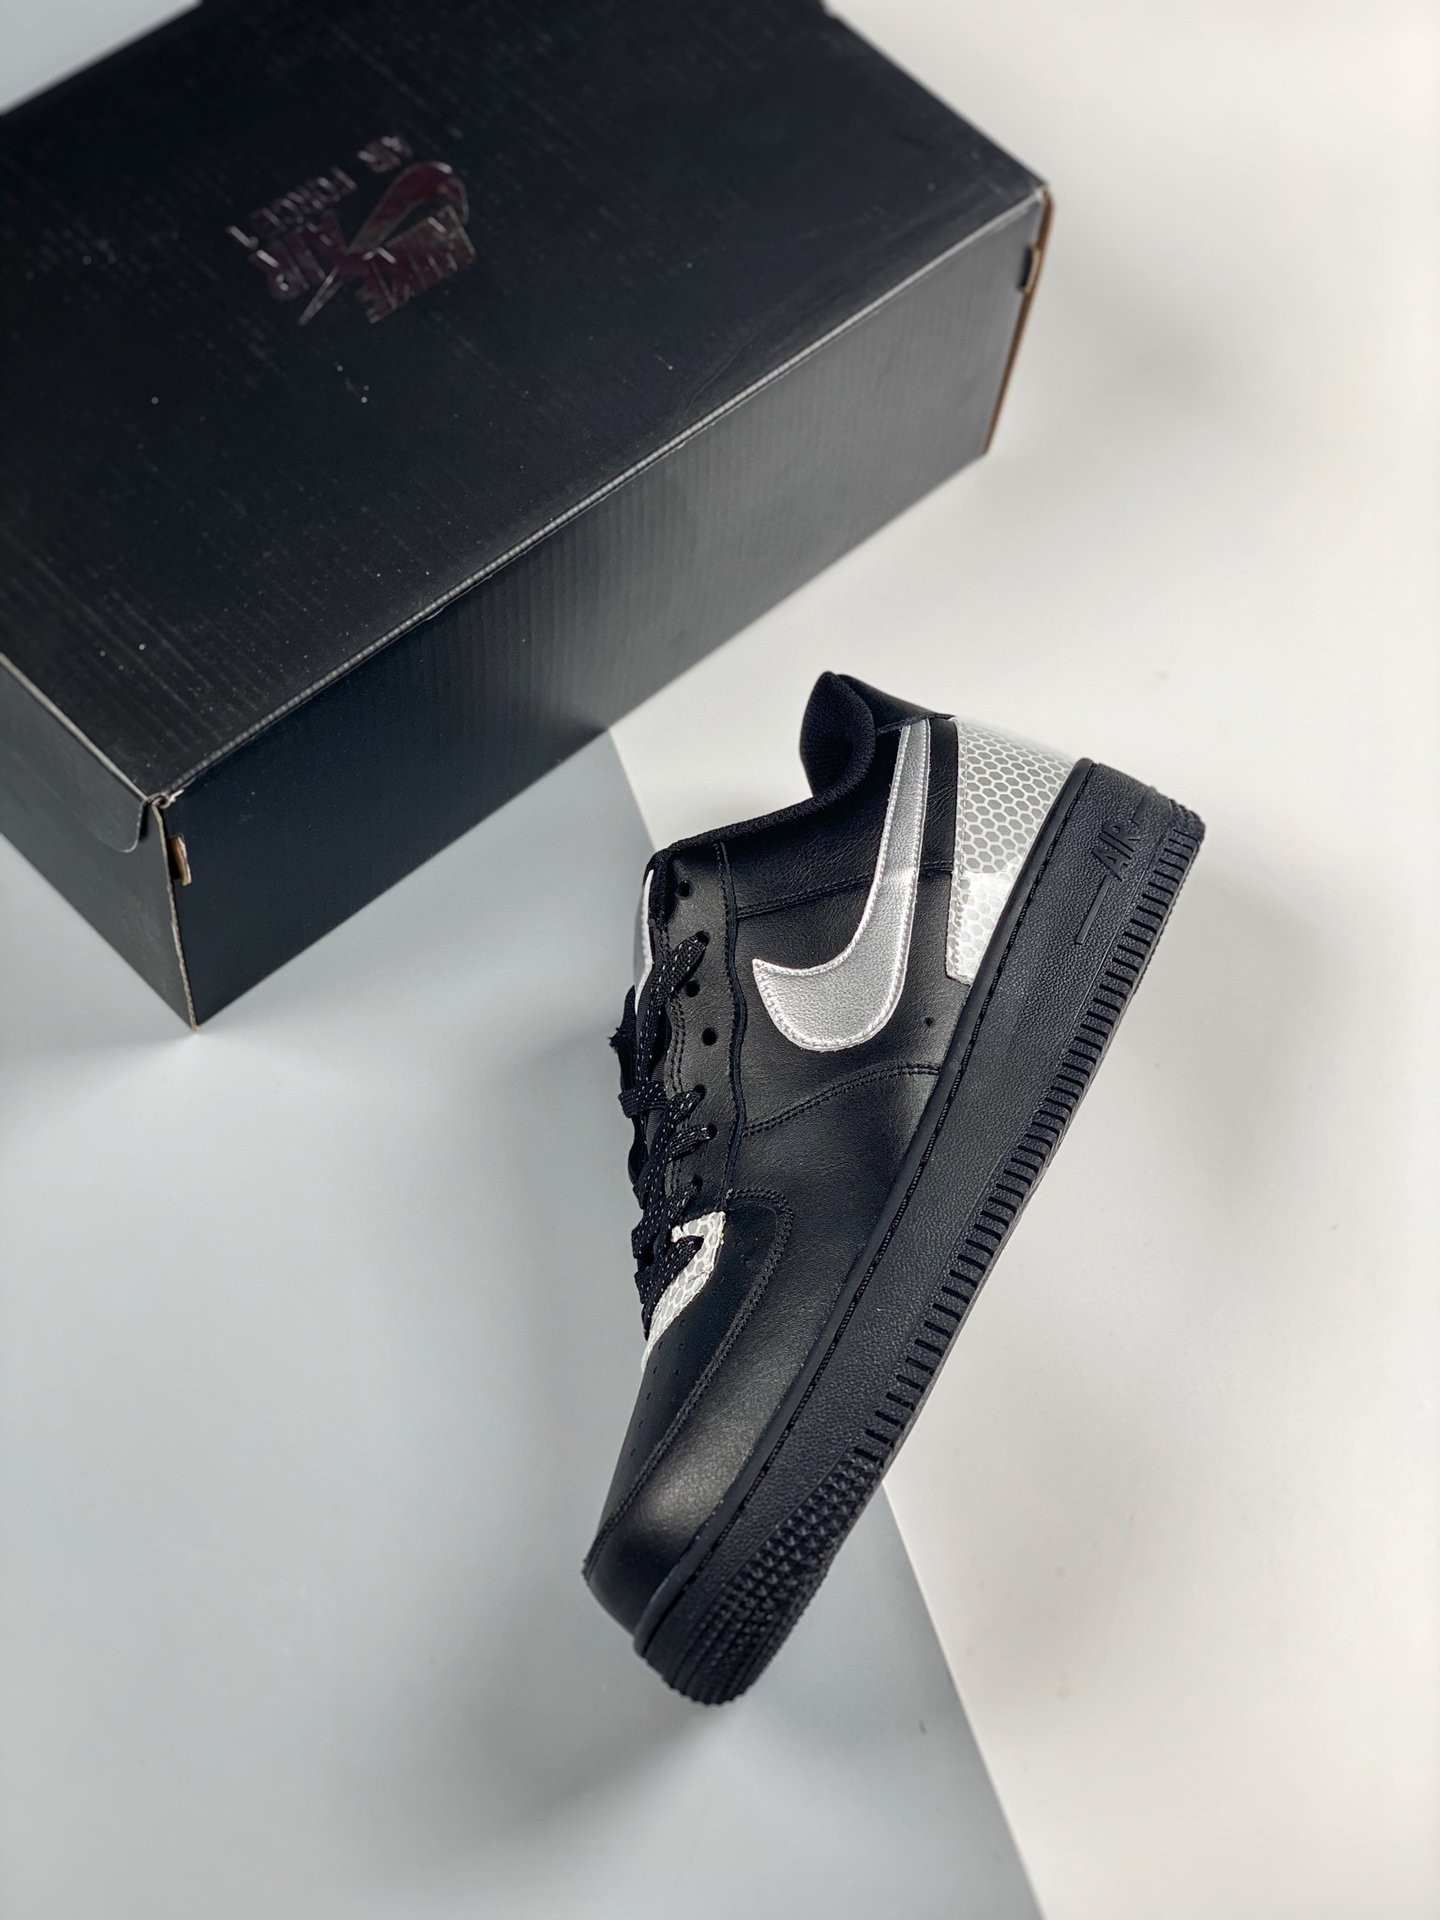 3M x Nike Air Force 1 Black Silver CT2299-001 For Sale